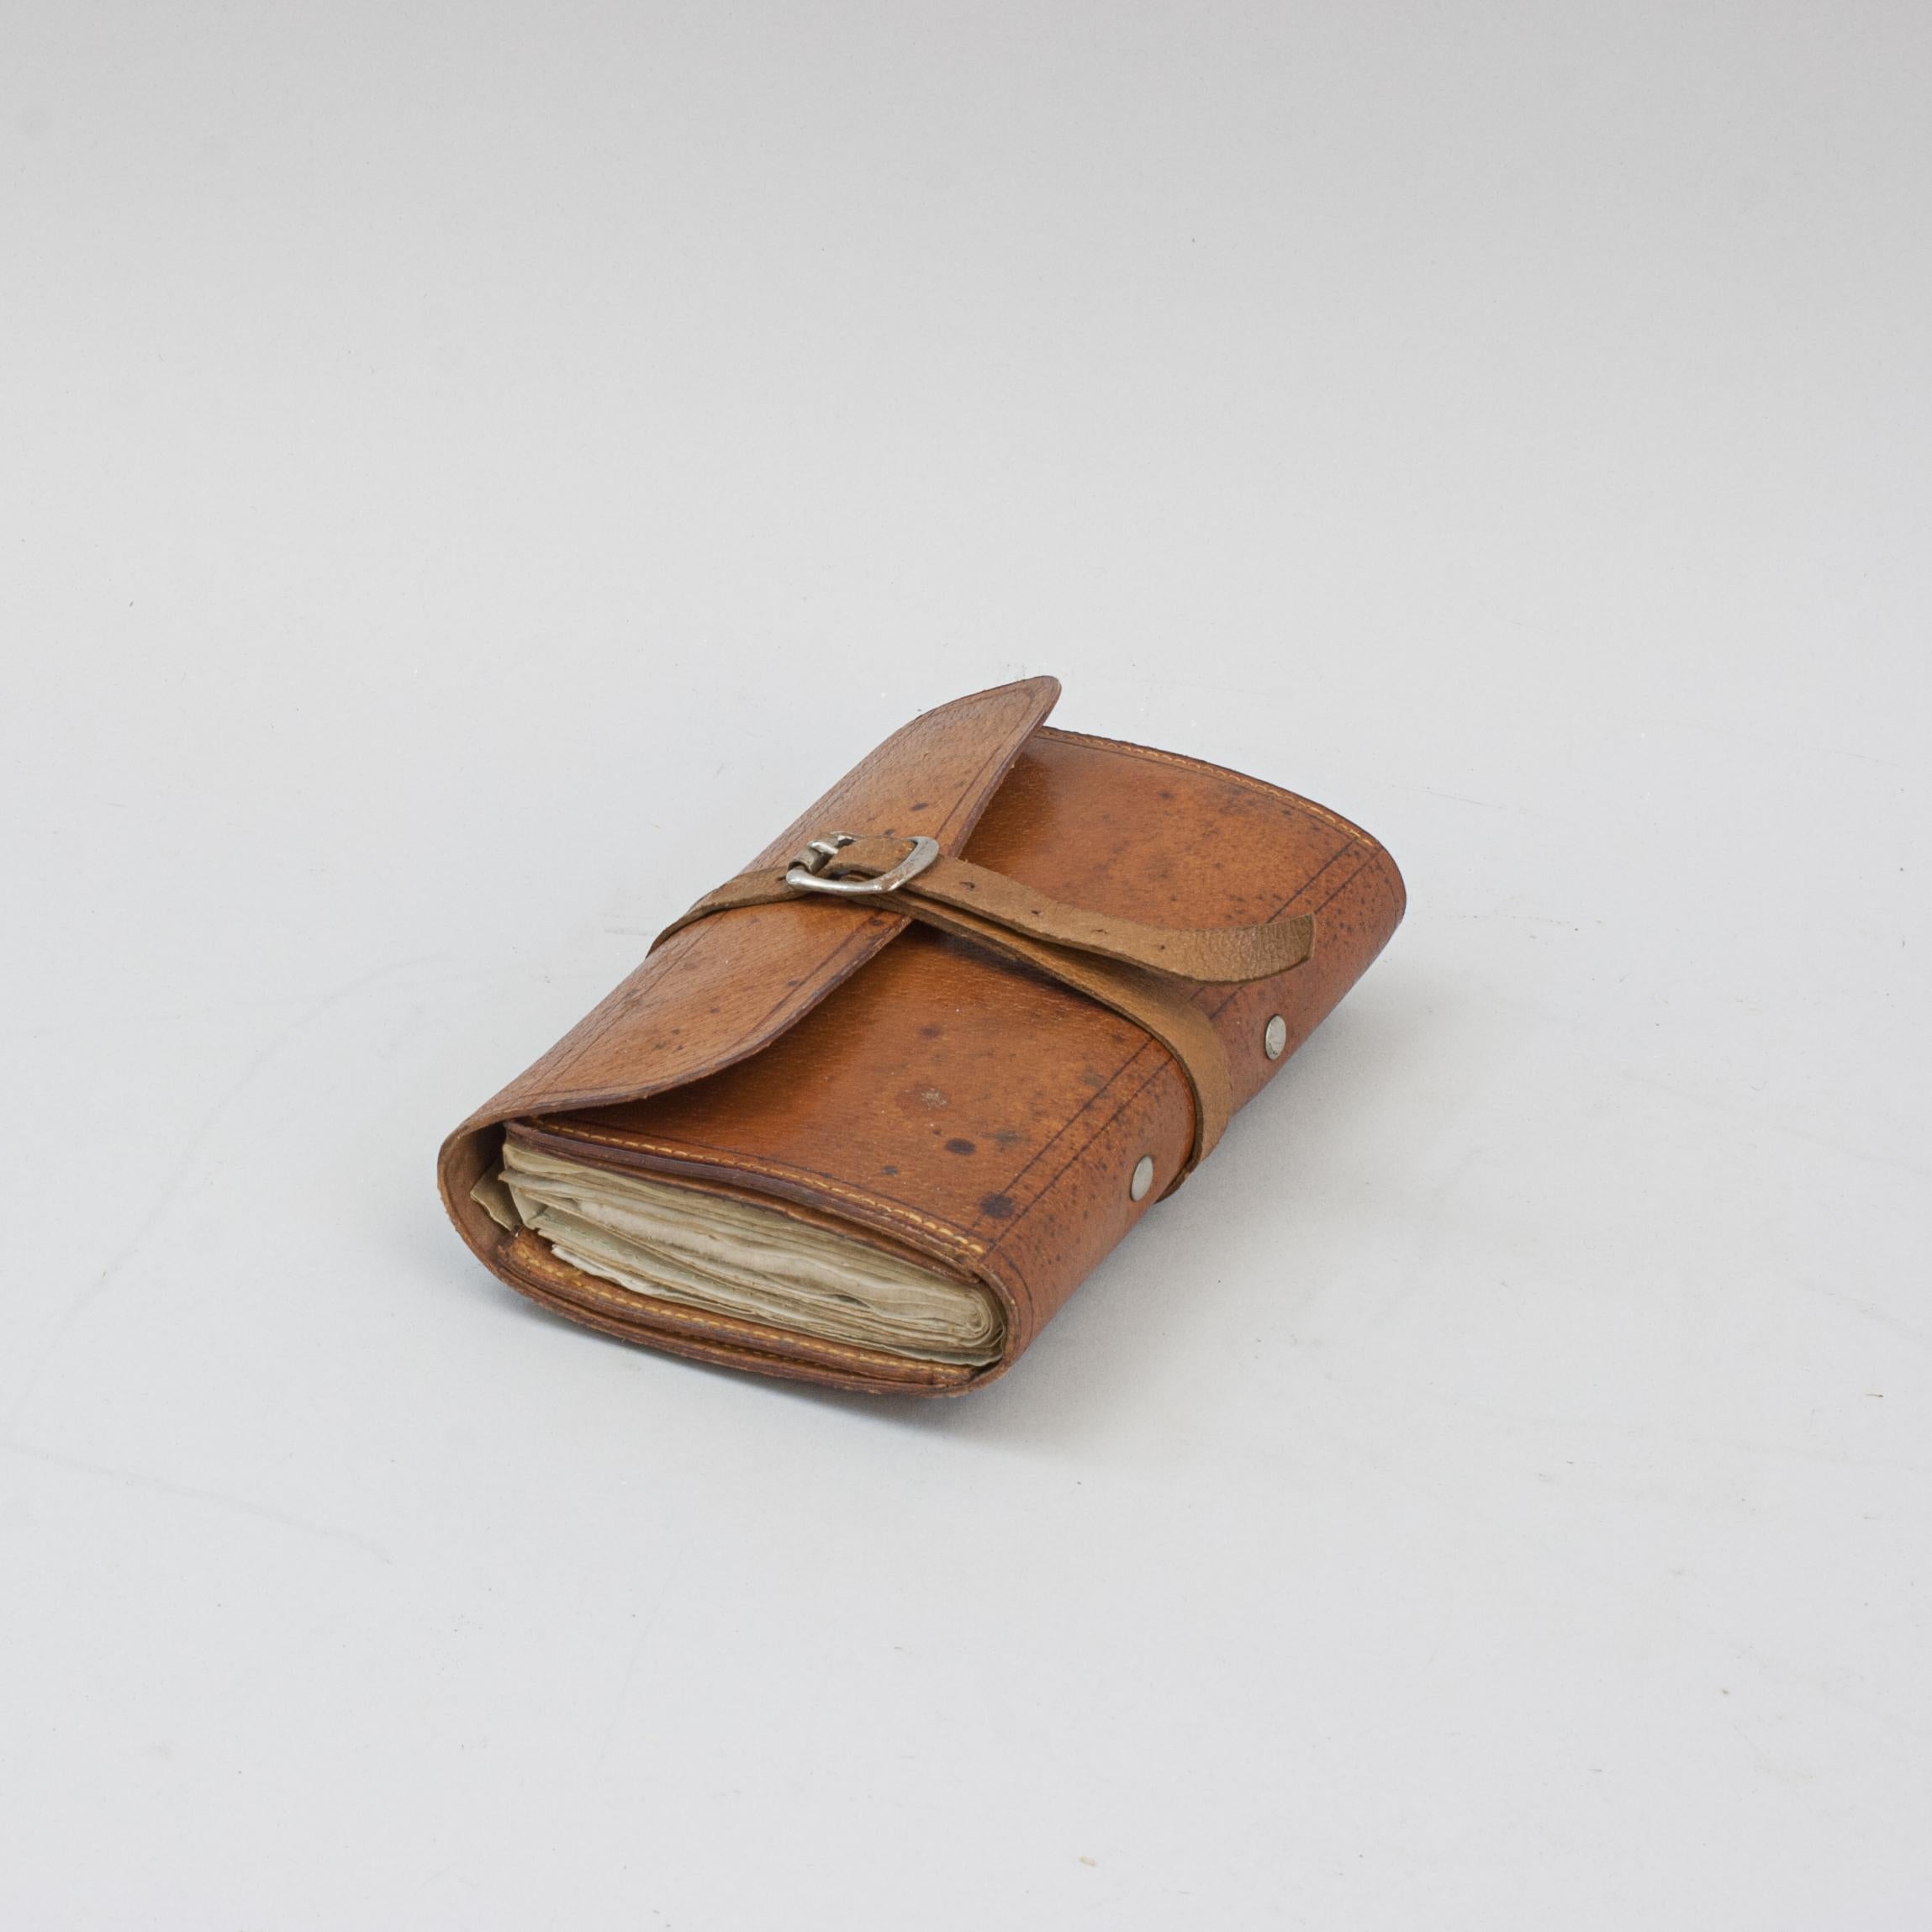 Vintage Leather Fly Wallet.
A good pigskin leather fishing fly and cast wallet with embossed tram line decoration. The brown leather is in original condition, the strap and buckle is a replacement. The wallet has two inside pockets, a selection of